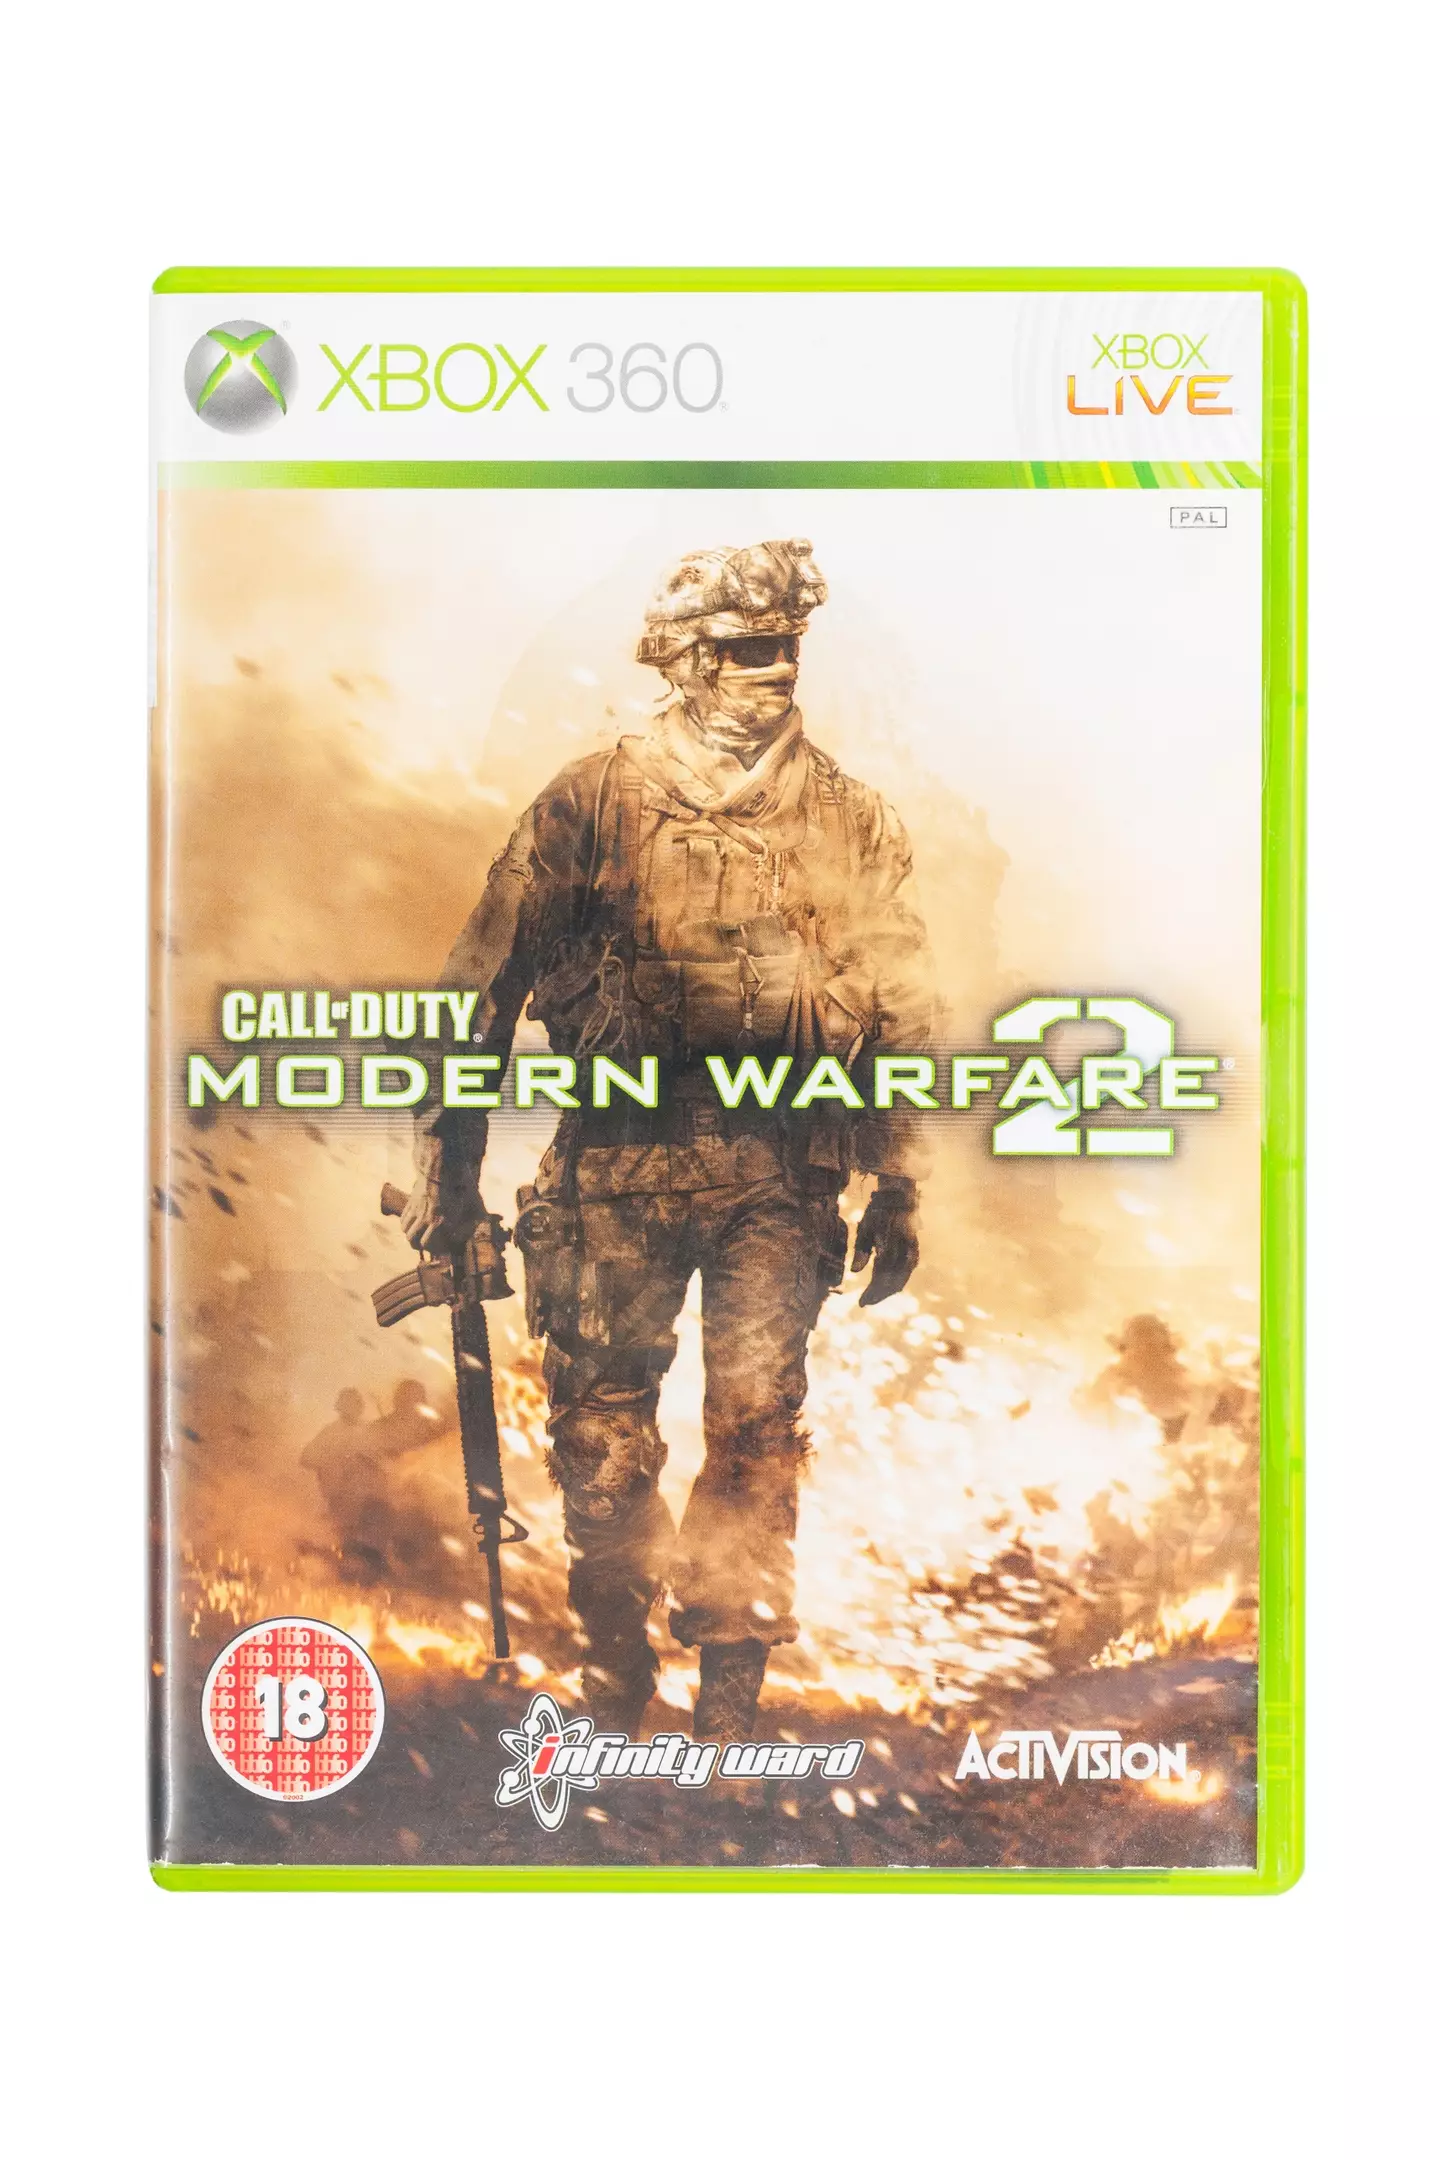 Debate on who the Modern Warfare 2 cover soldier is has gone on for years.